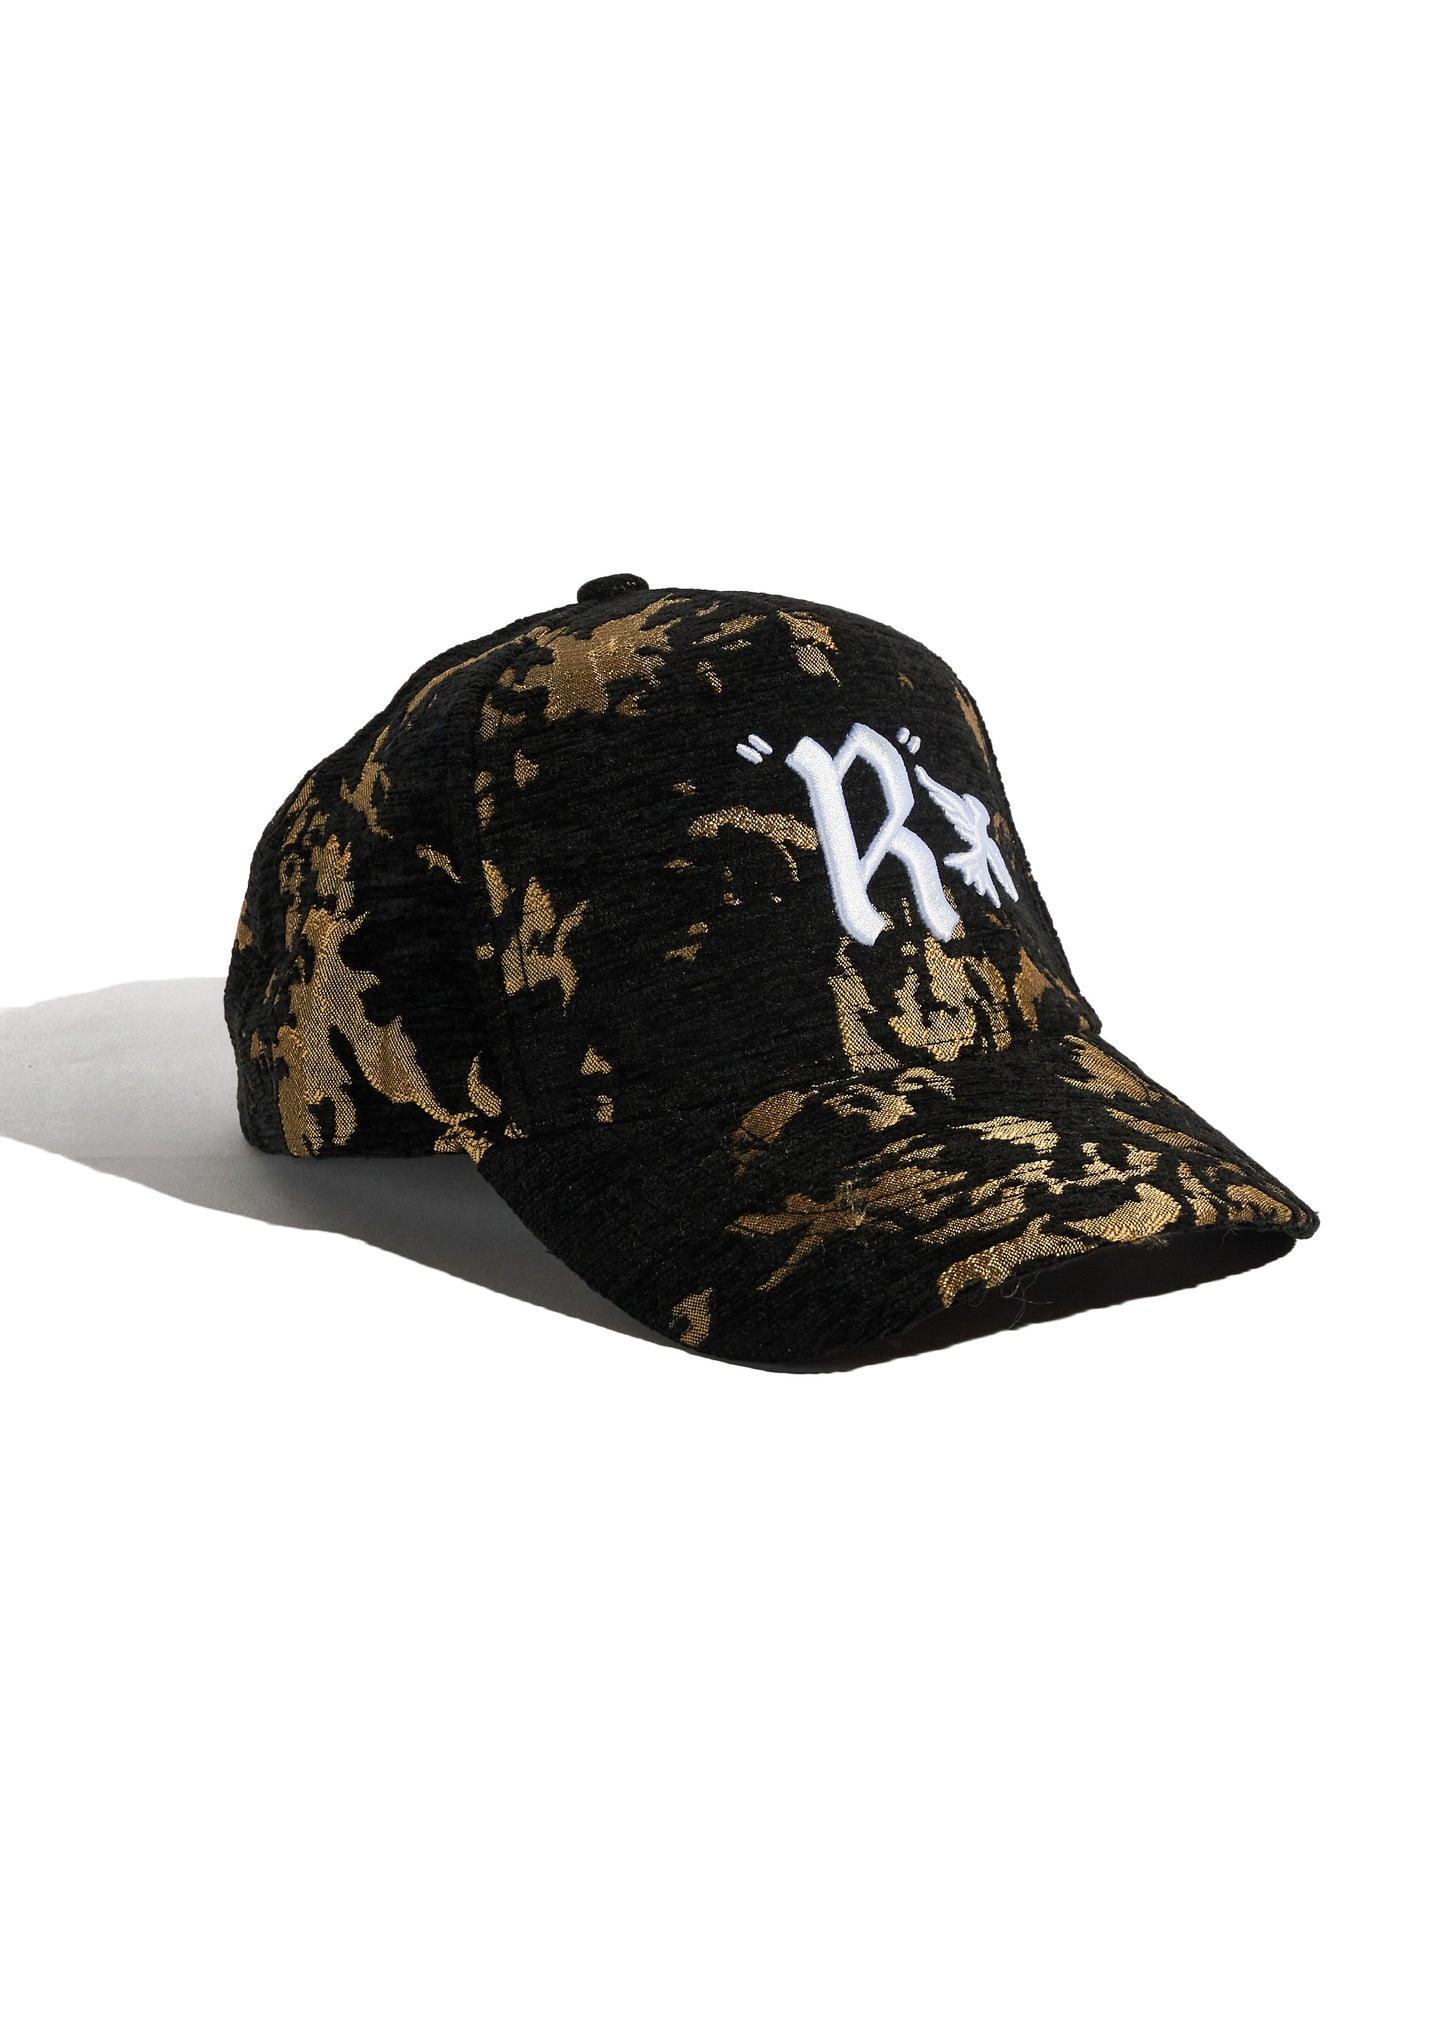 Luxe (Black/Gold Woven)